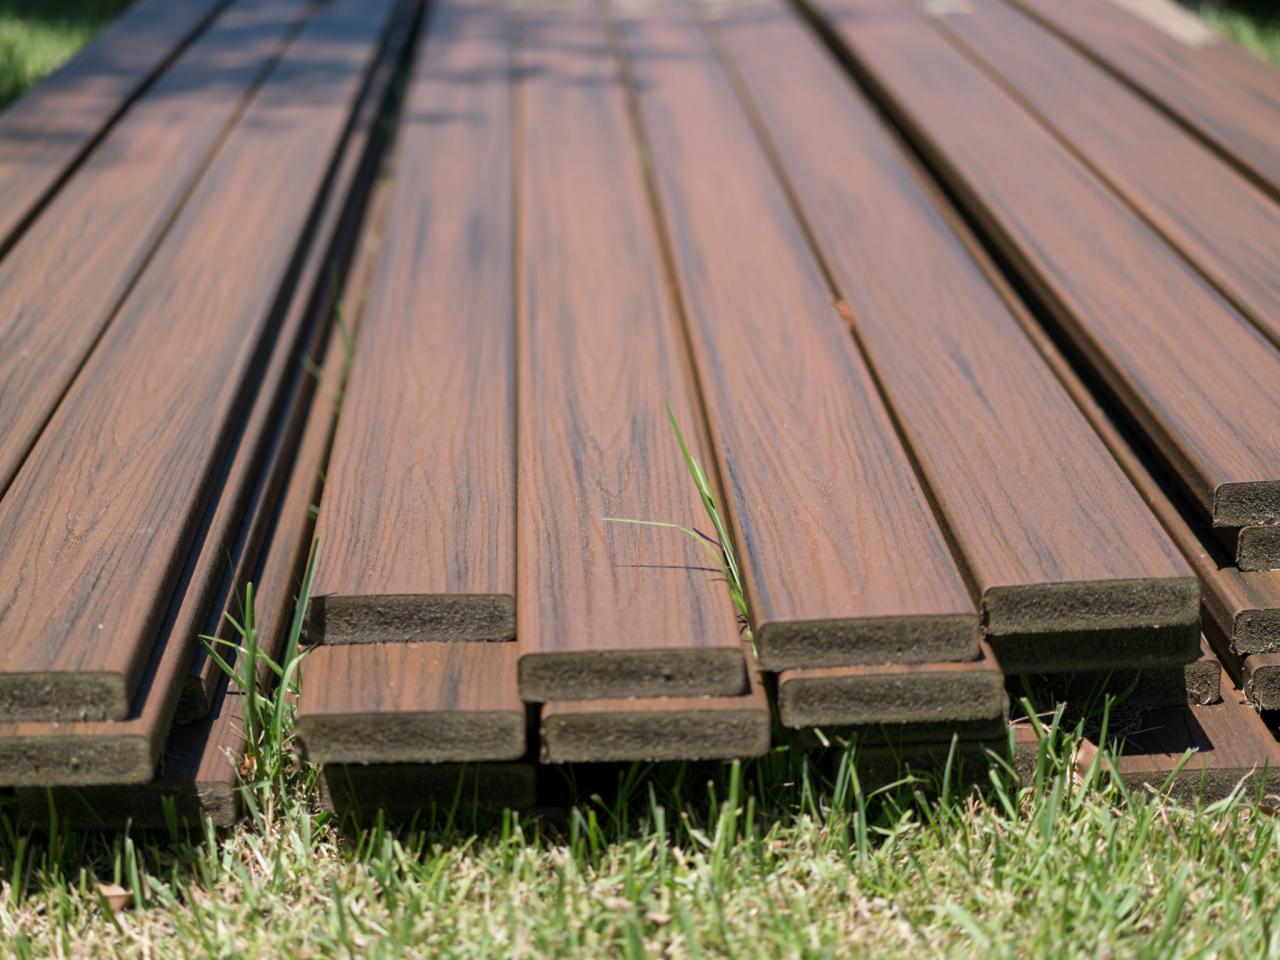 Decking Materials, What Is The Best Material For Outdoor Decks